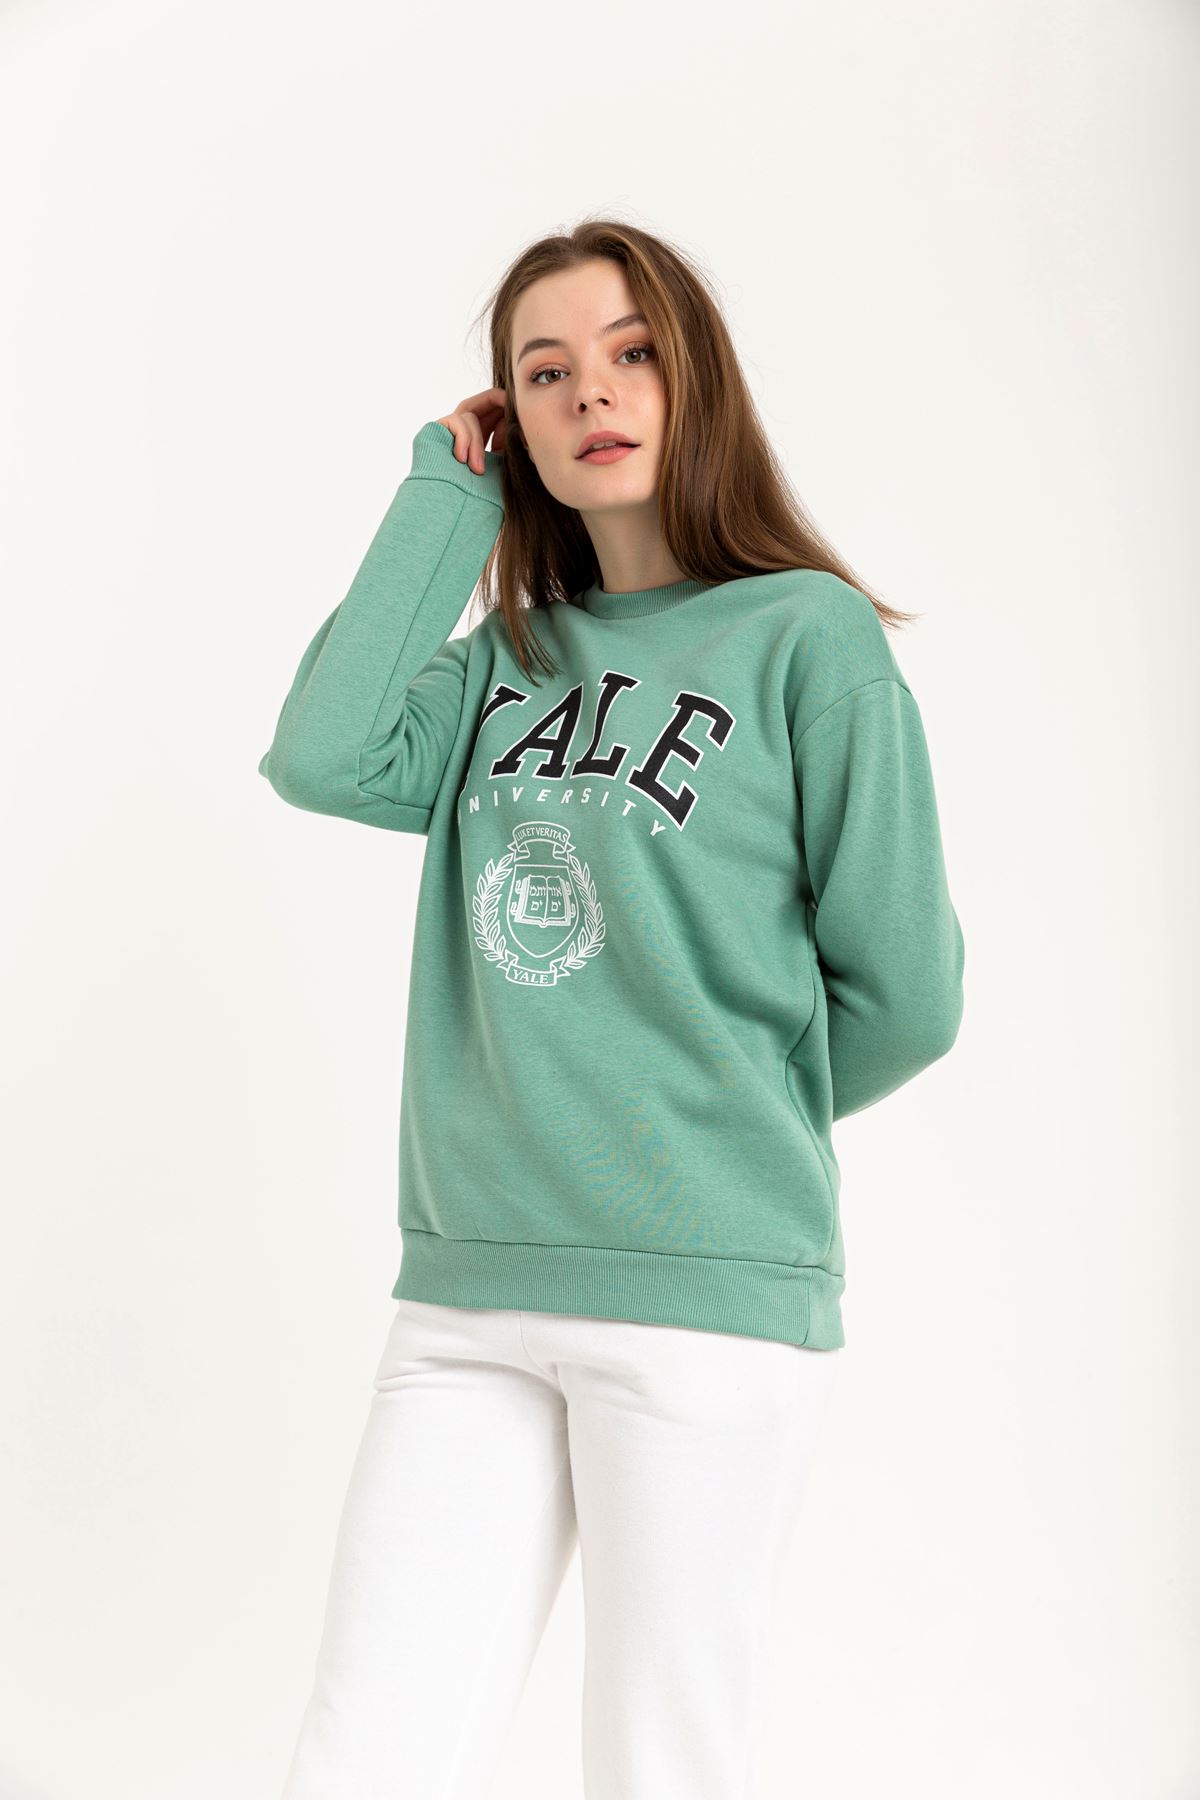 Third Knit With Wool İnside Fabric Long Sleeve Hip Height Inscribed Women Sweatshirt - Mint